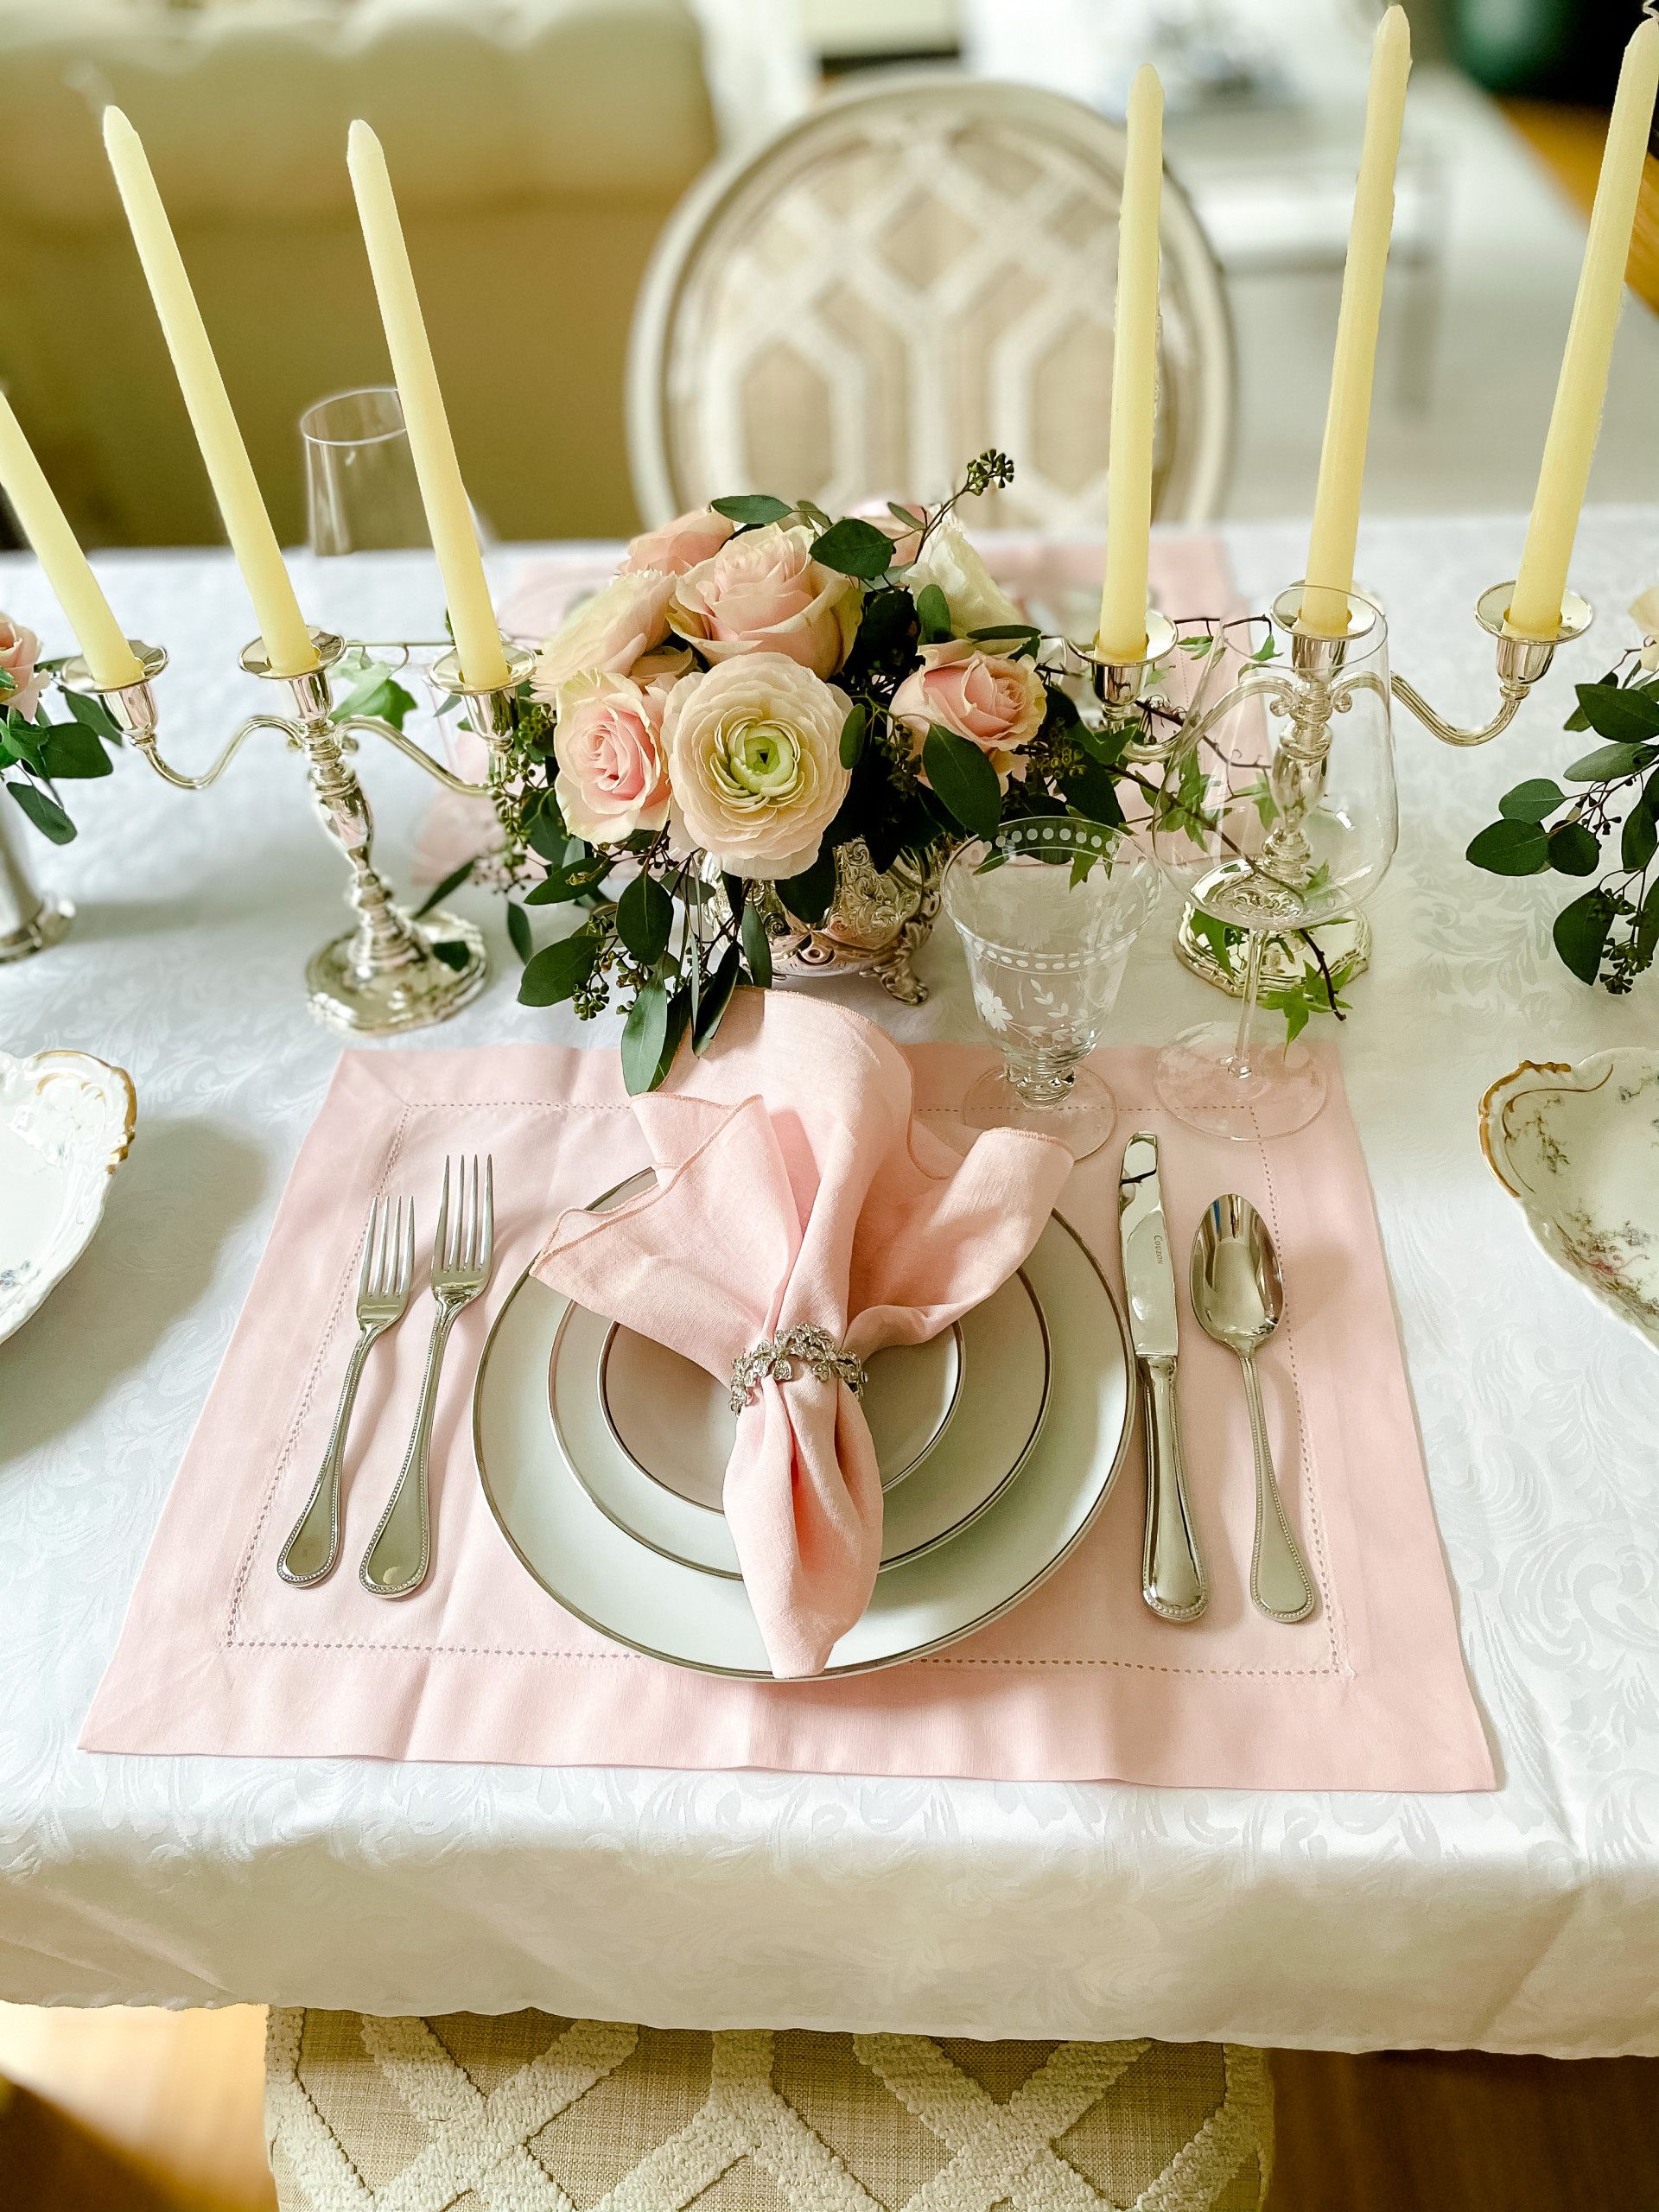 16 Romantic Valentine's Day Tablescapes to Set the Mood